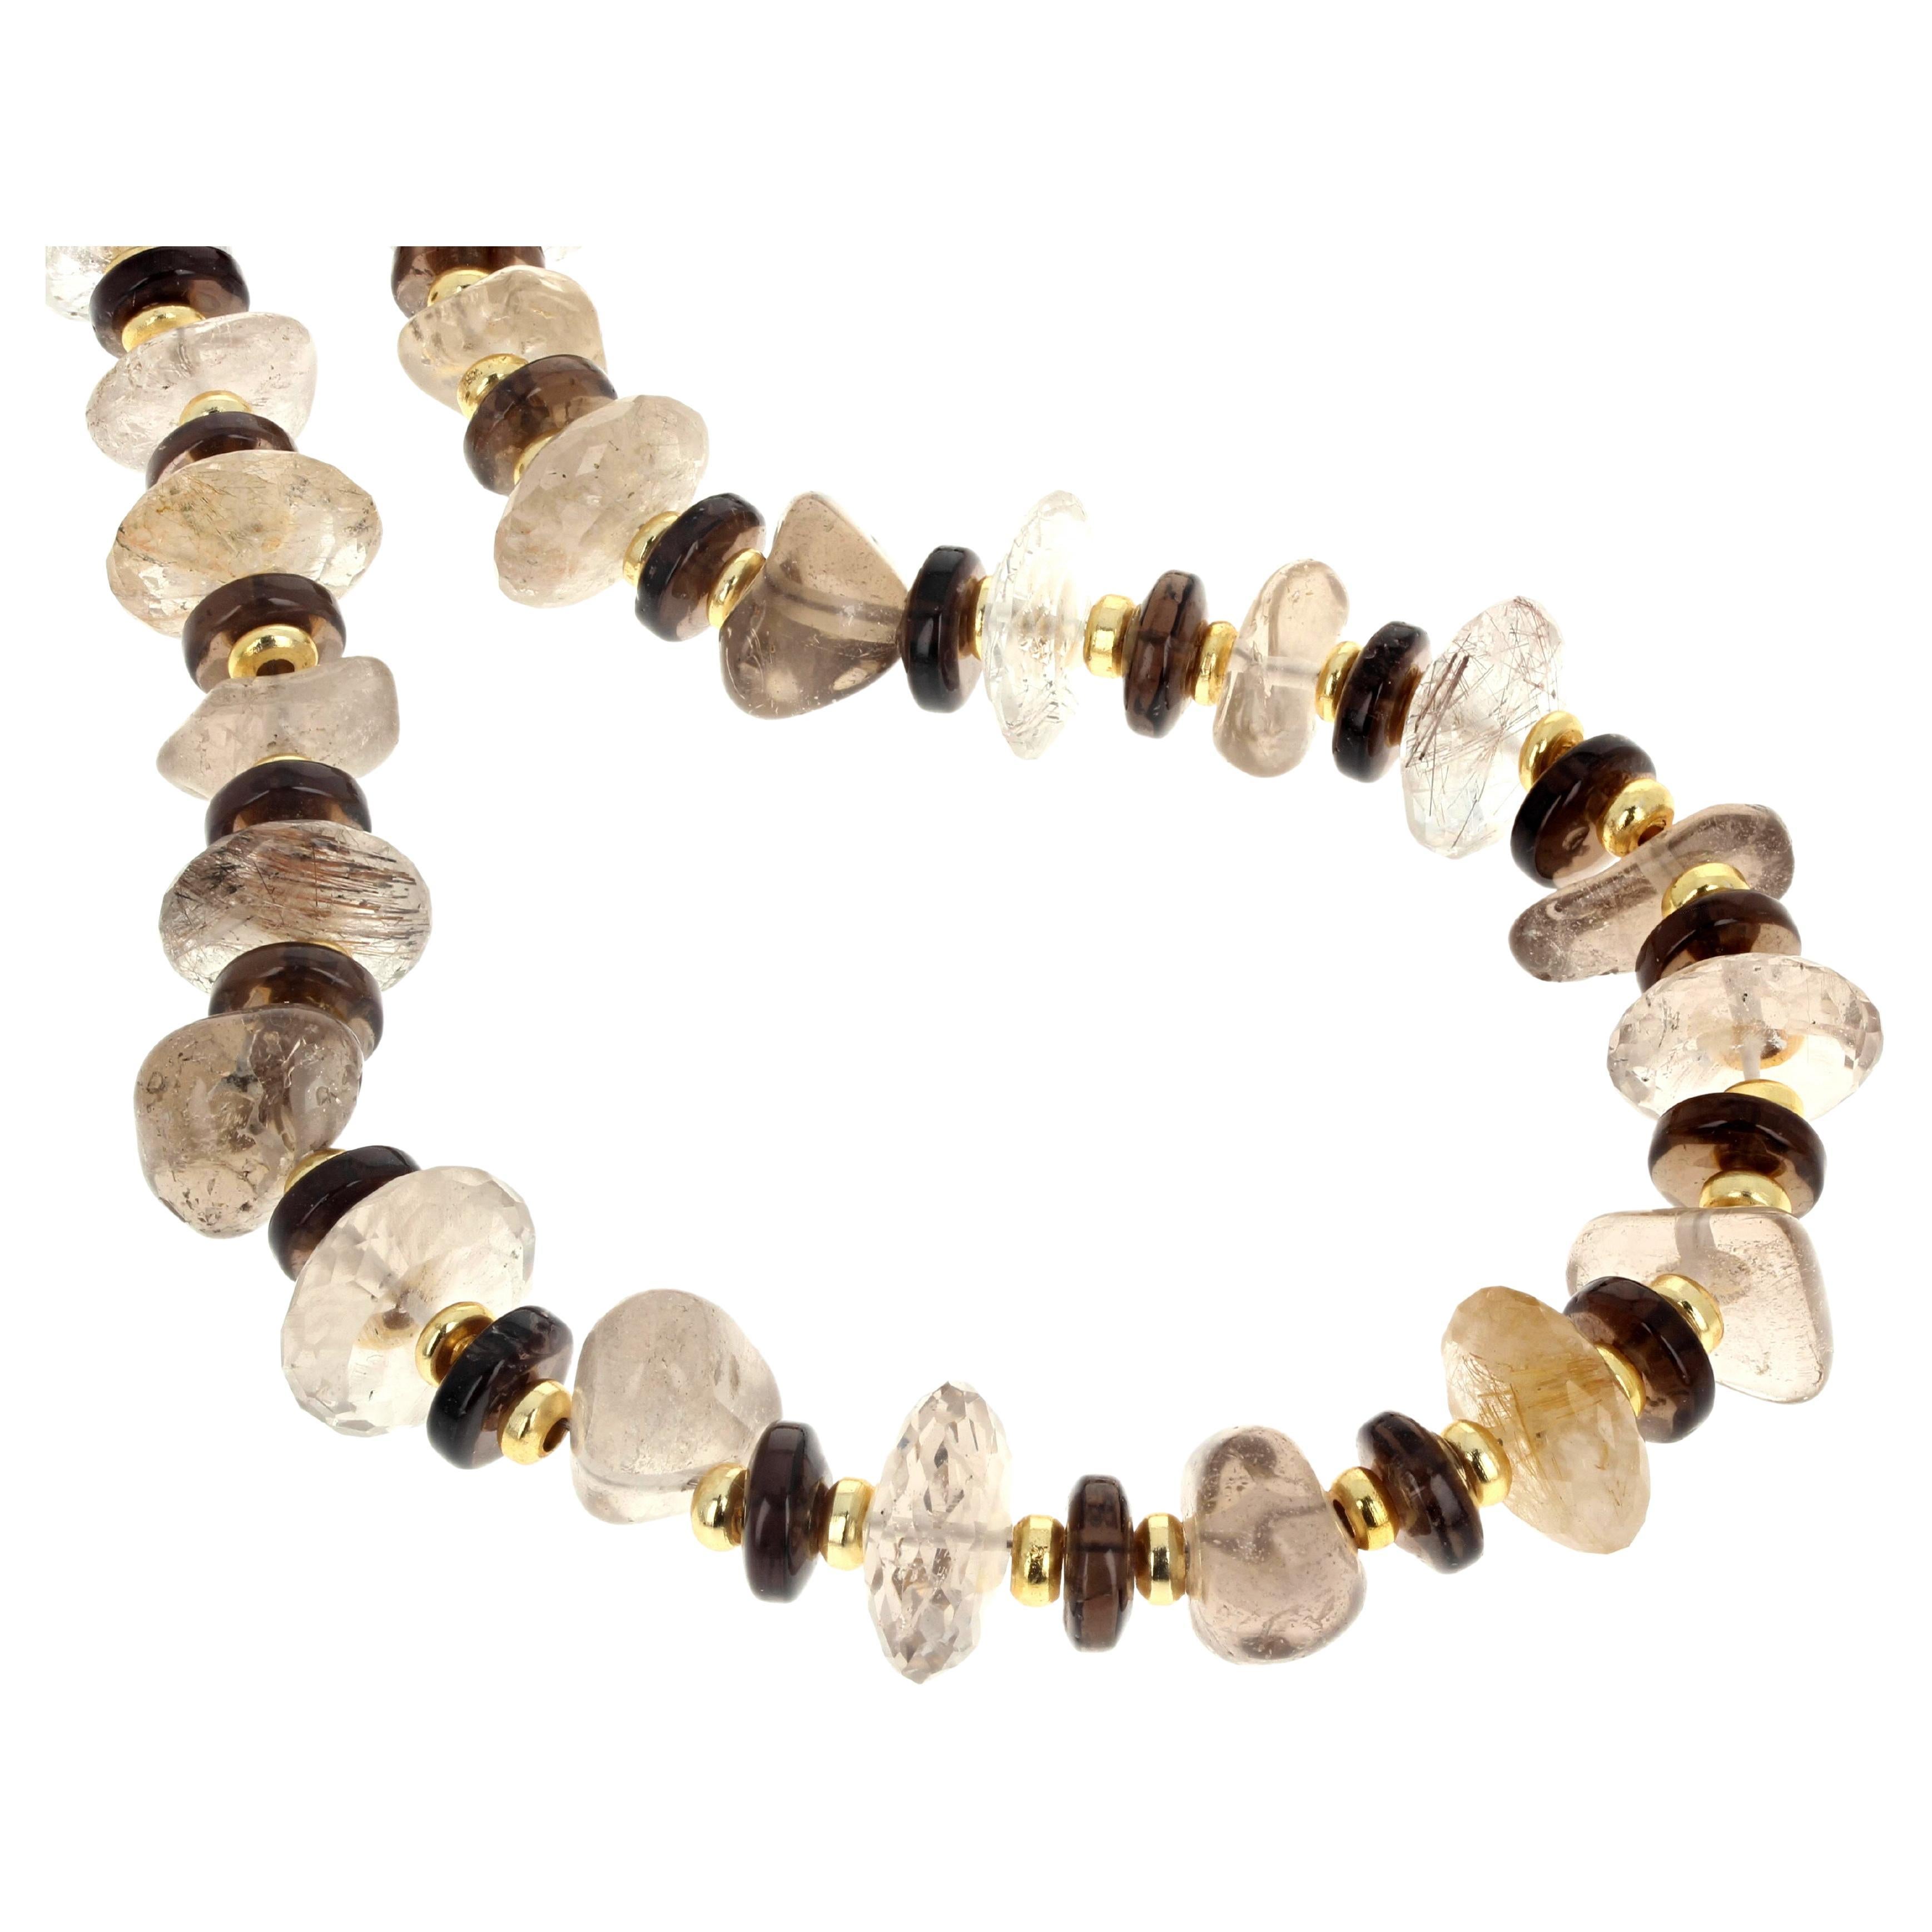 This fascinating delightful natural Smoky Quartz necklace is 18 inches long.  It is composed of several different colors, purities and intensities of Smoky Quartz in different cuts but all are polished.  It is enhanced with tiny little round gold